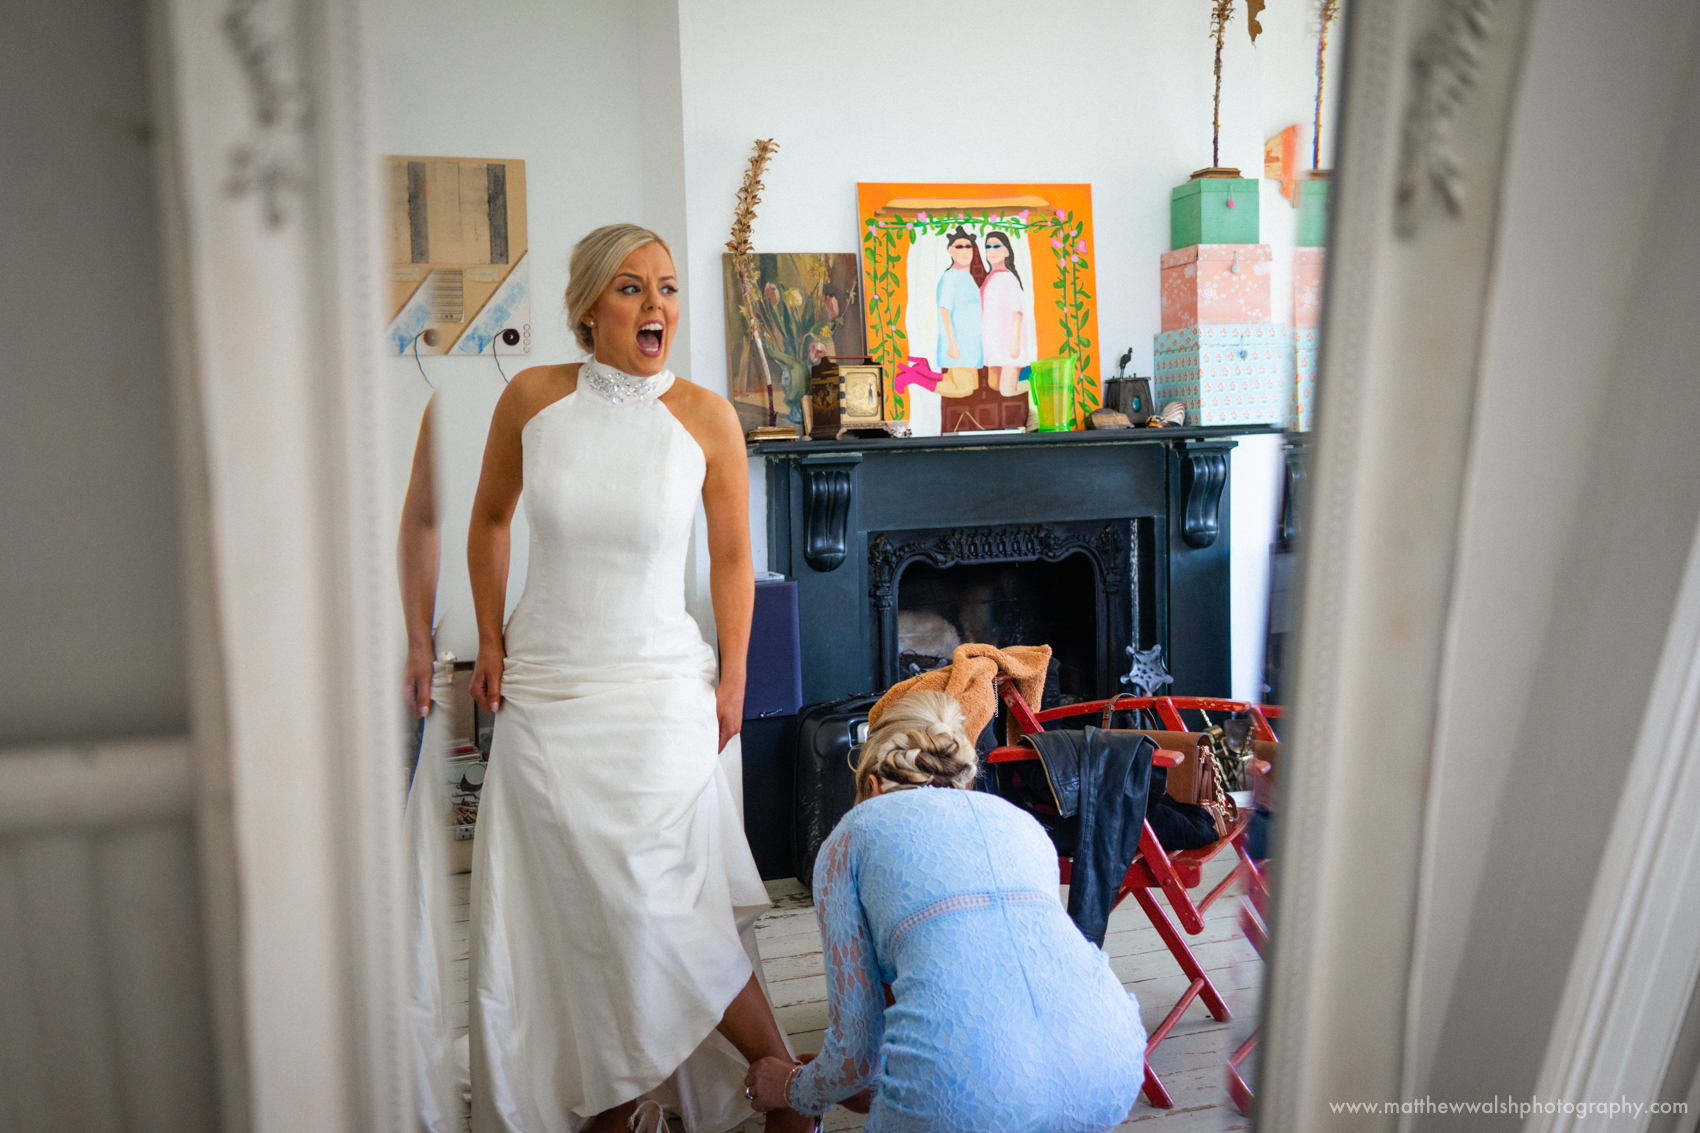 A real documentary style moment as the bride shoes are tightened too tight